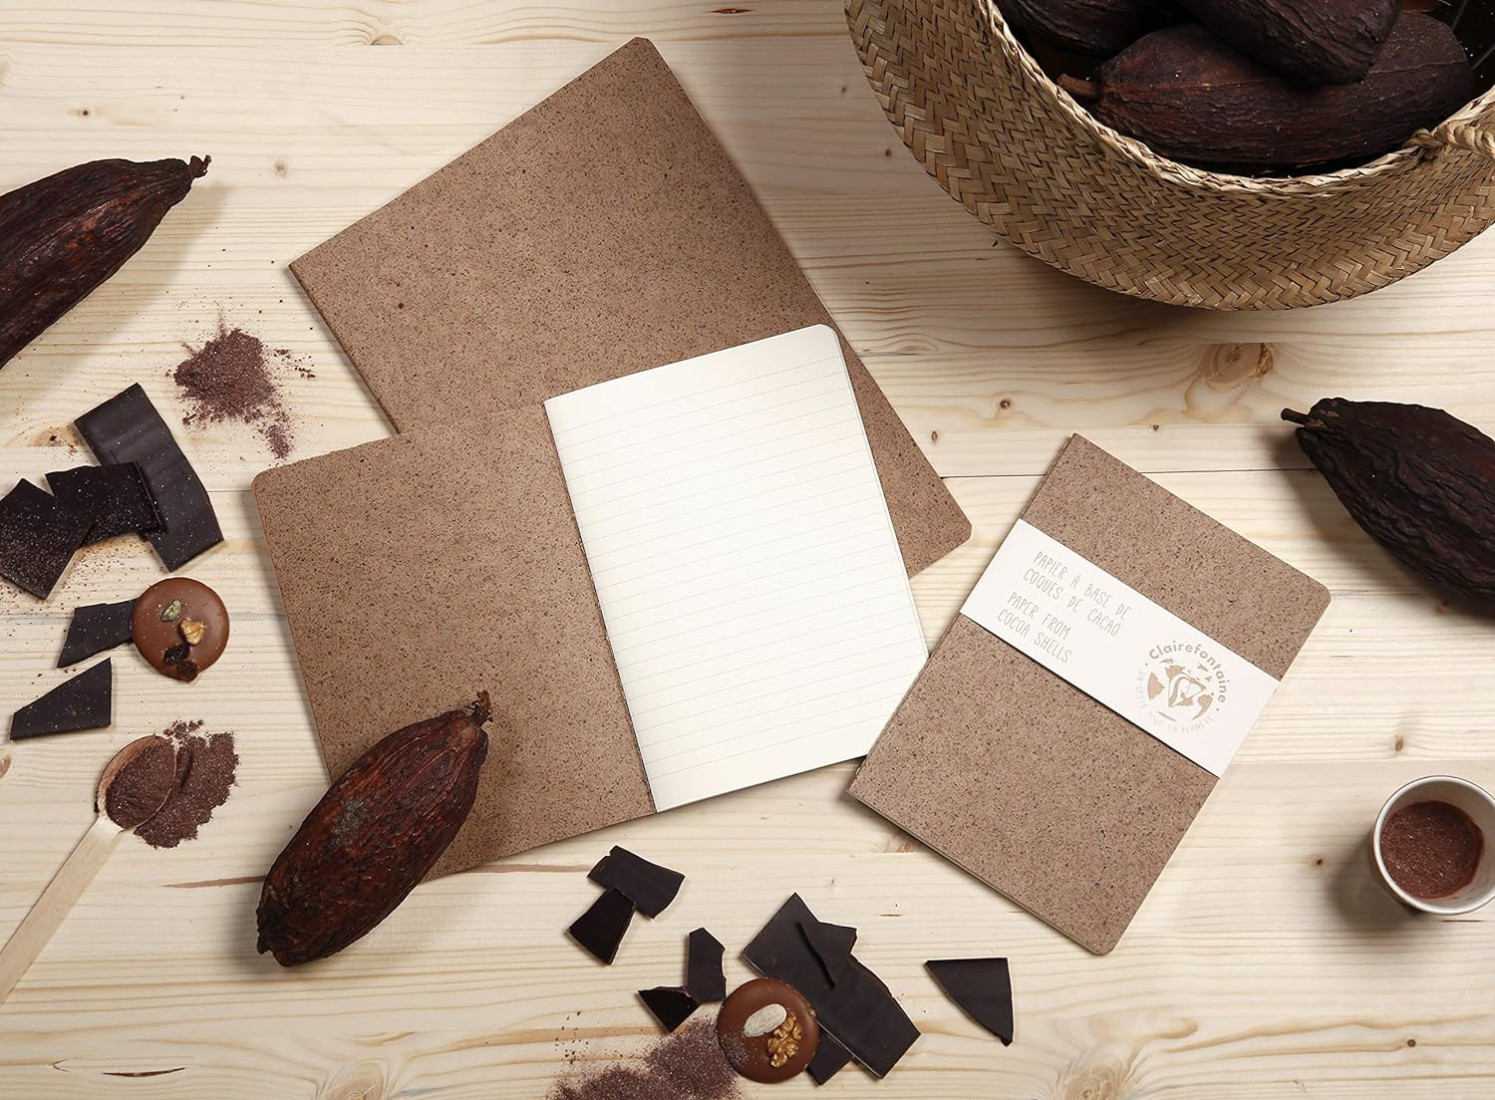 Clairefontaine Rhodia 83523C - A Stitched Sewn Notebook Cover Paper made from Cocoa Shells - A4 21x29.7 cm 96 Lined Pages 90g Ivory Paper - With Flap - Jeans&Cocoa Collection